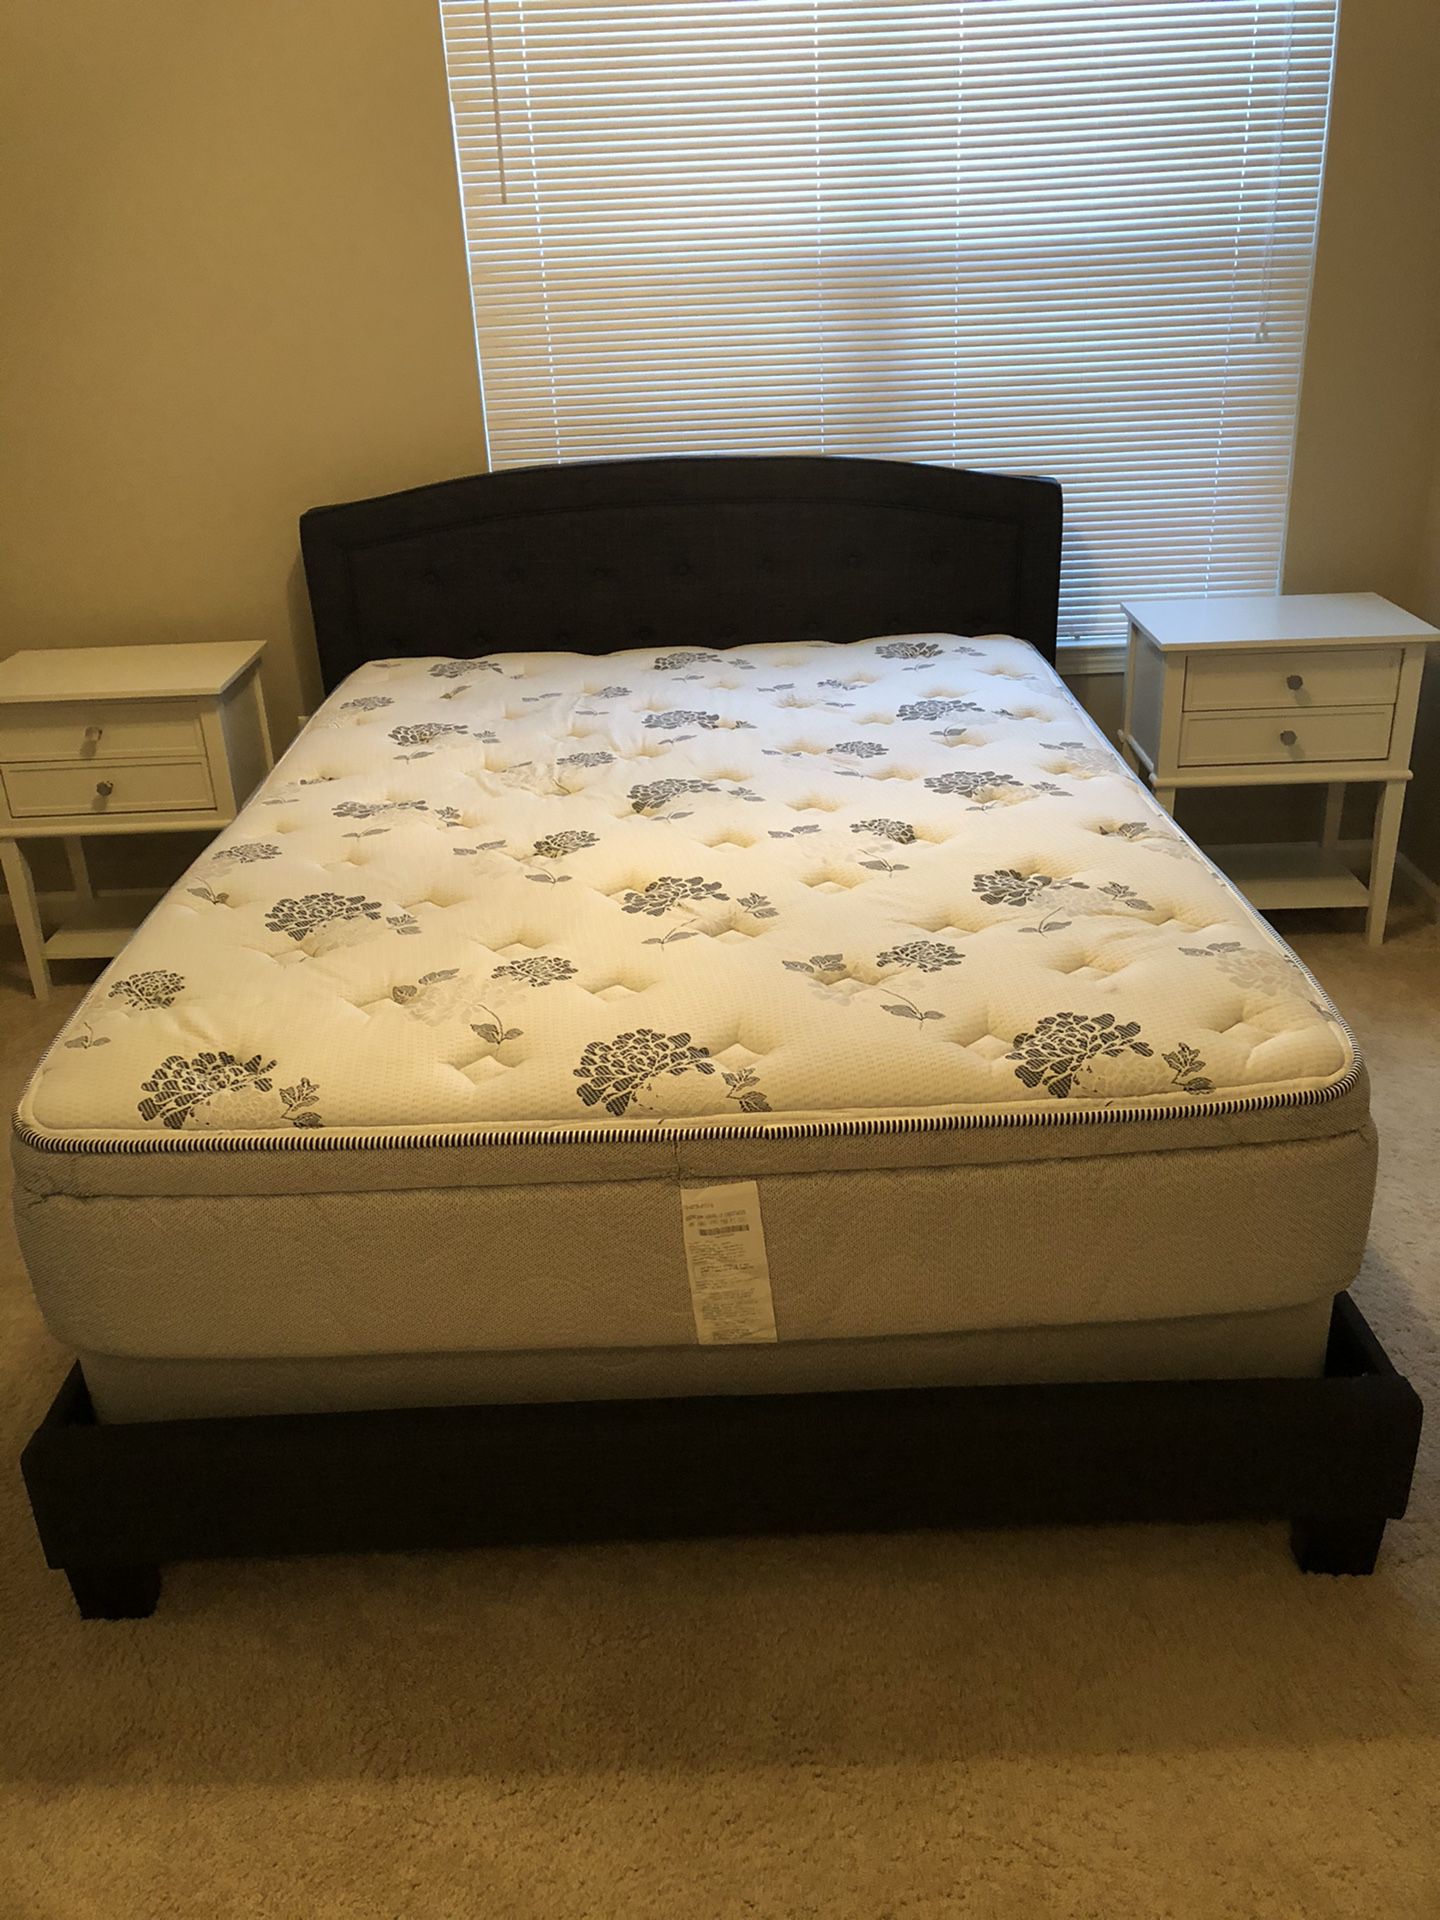 Charcoal upholstered queen bed frame